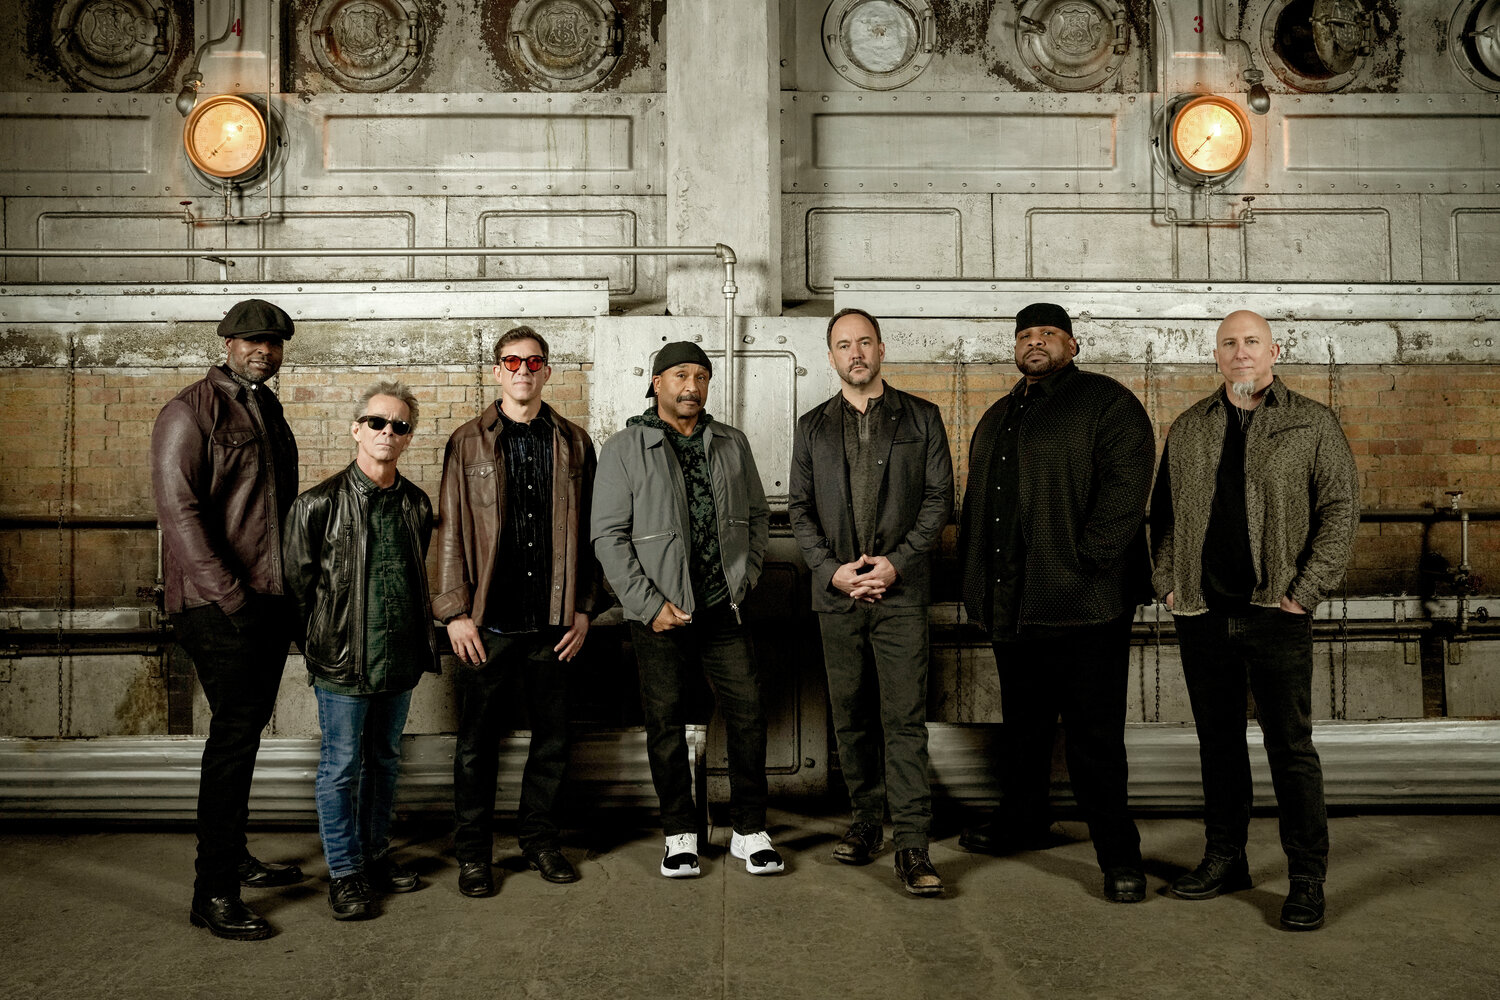 Dave Matthews Band takes the stage in Orange Beach July 26.